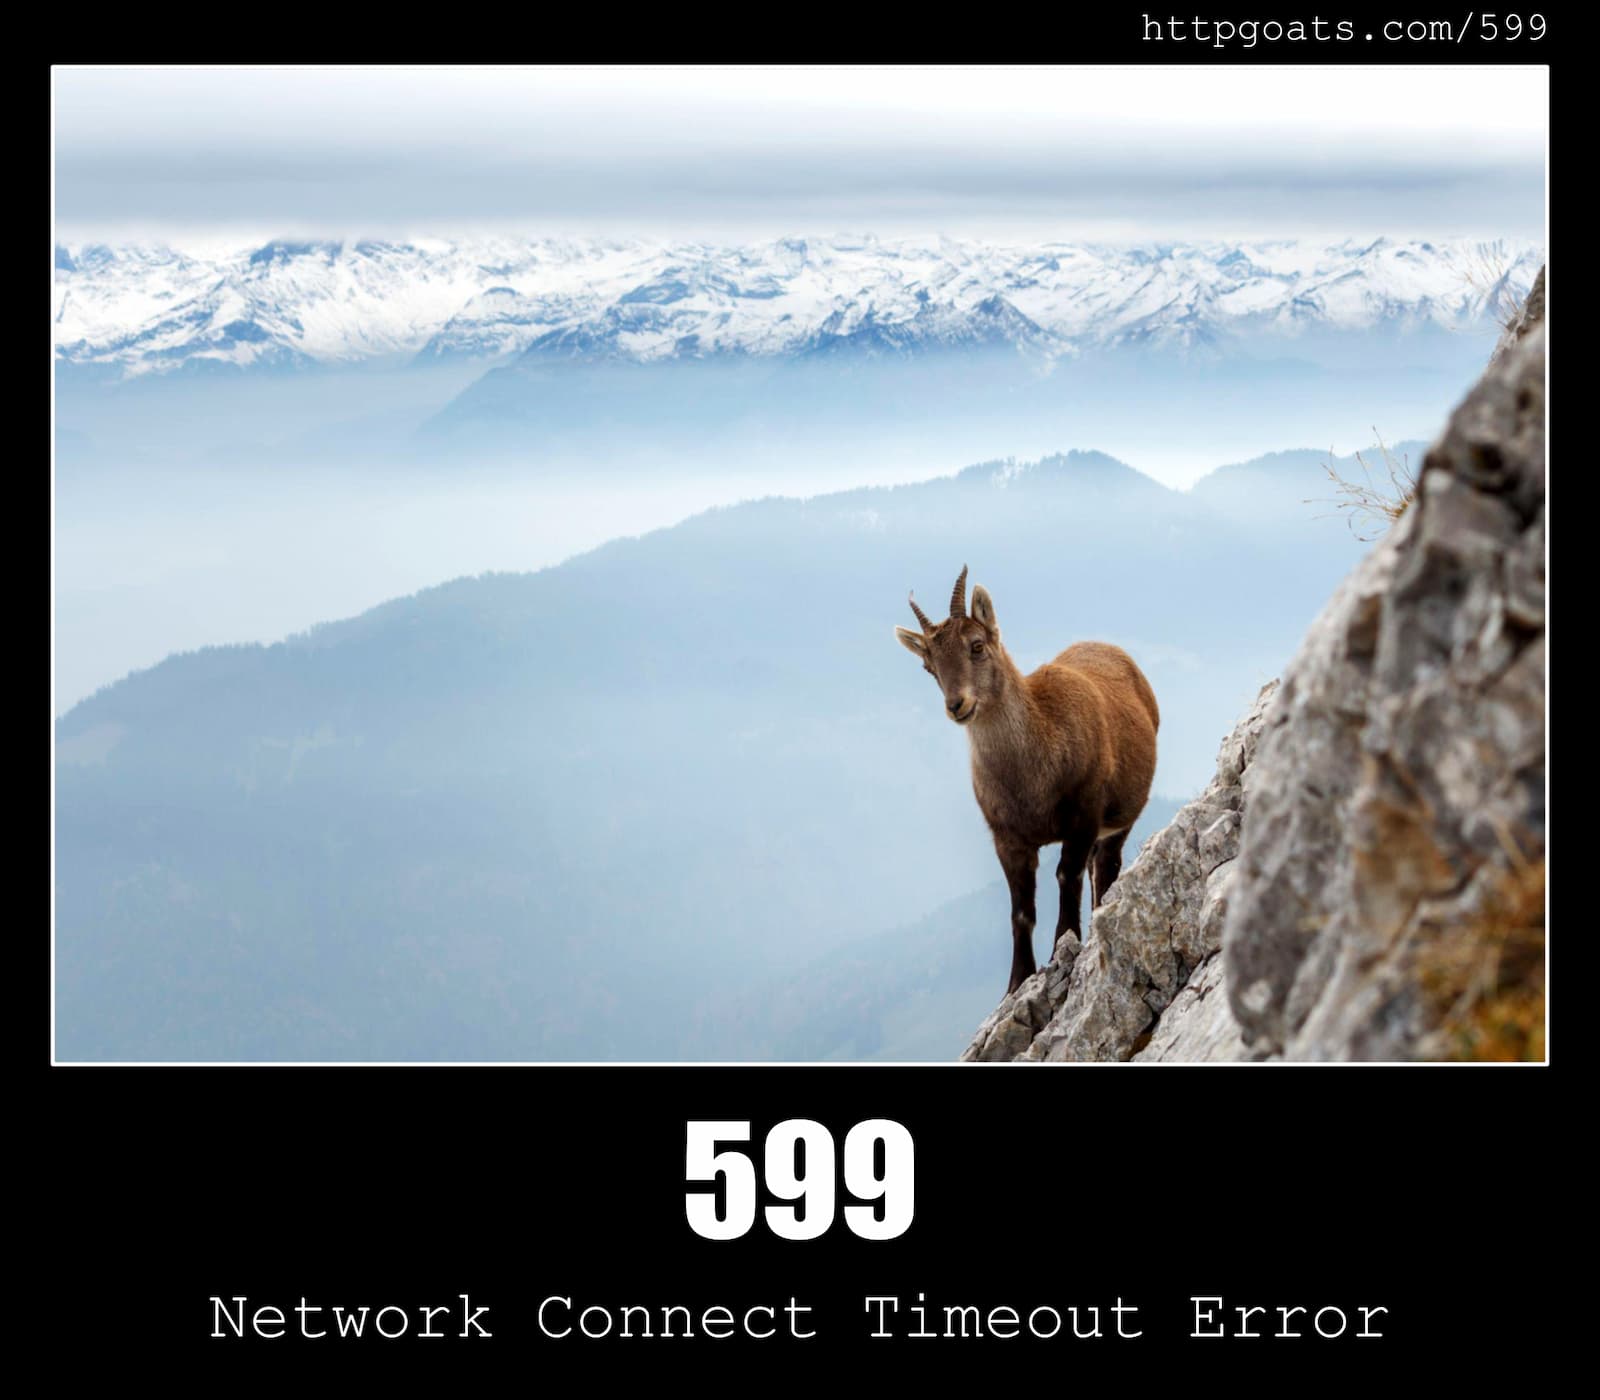 HTTP Status Code 599 Network Connect Timeout Error & Goats